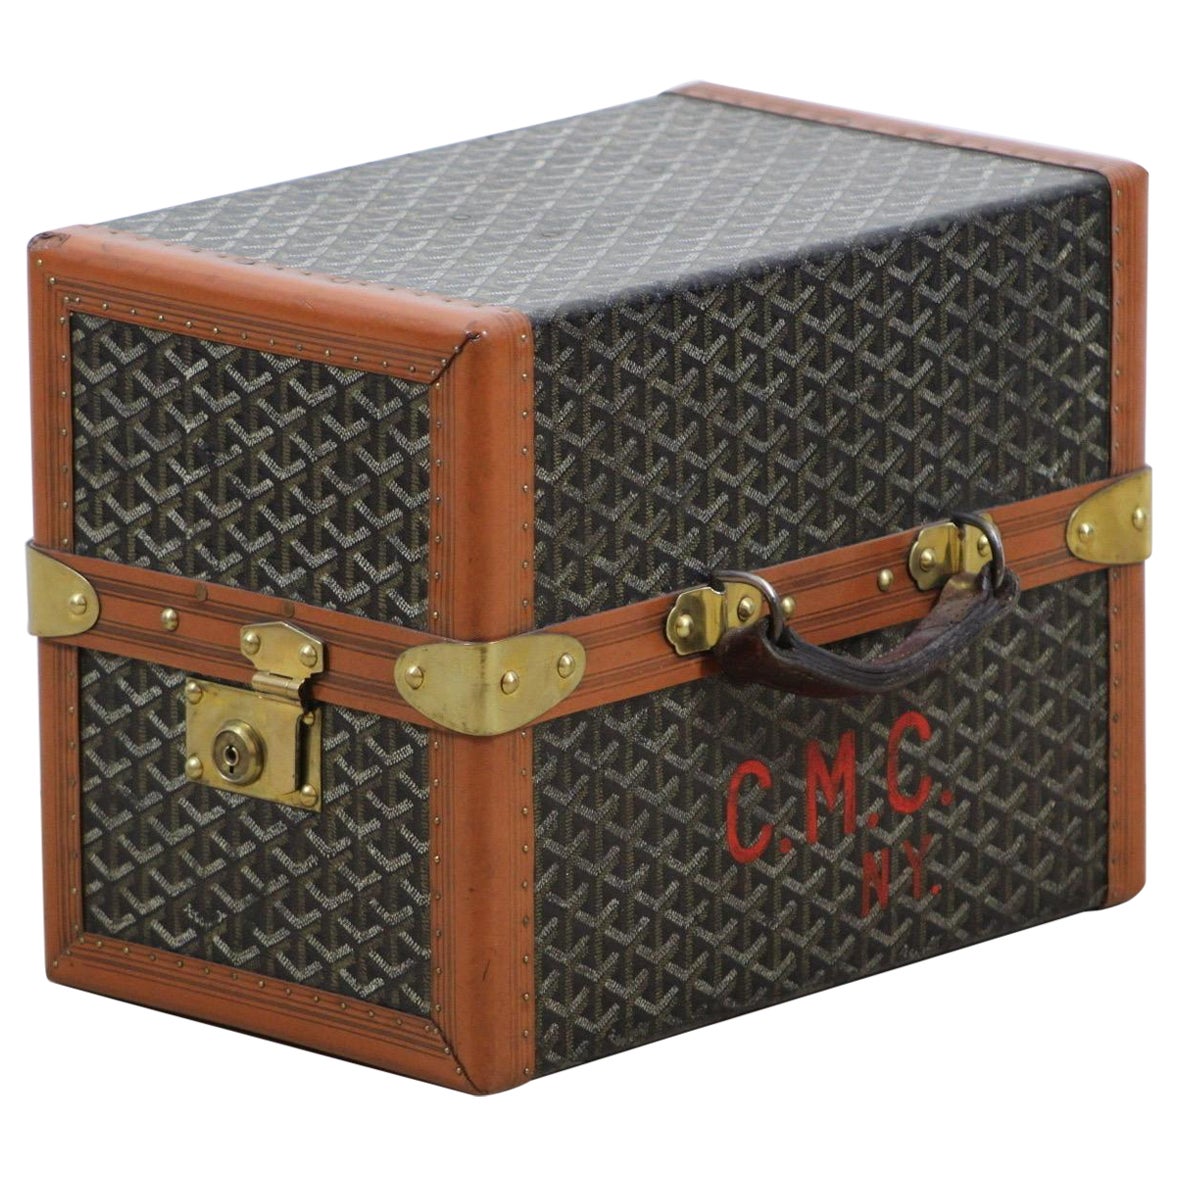 Goyard Bourget PM Travel Trolley Carry Bag Trunk Case Box Brown Auth New  proof